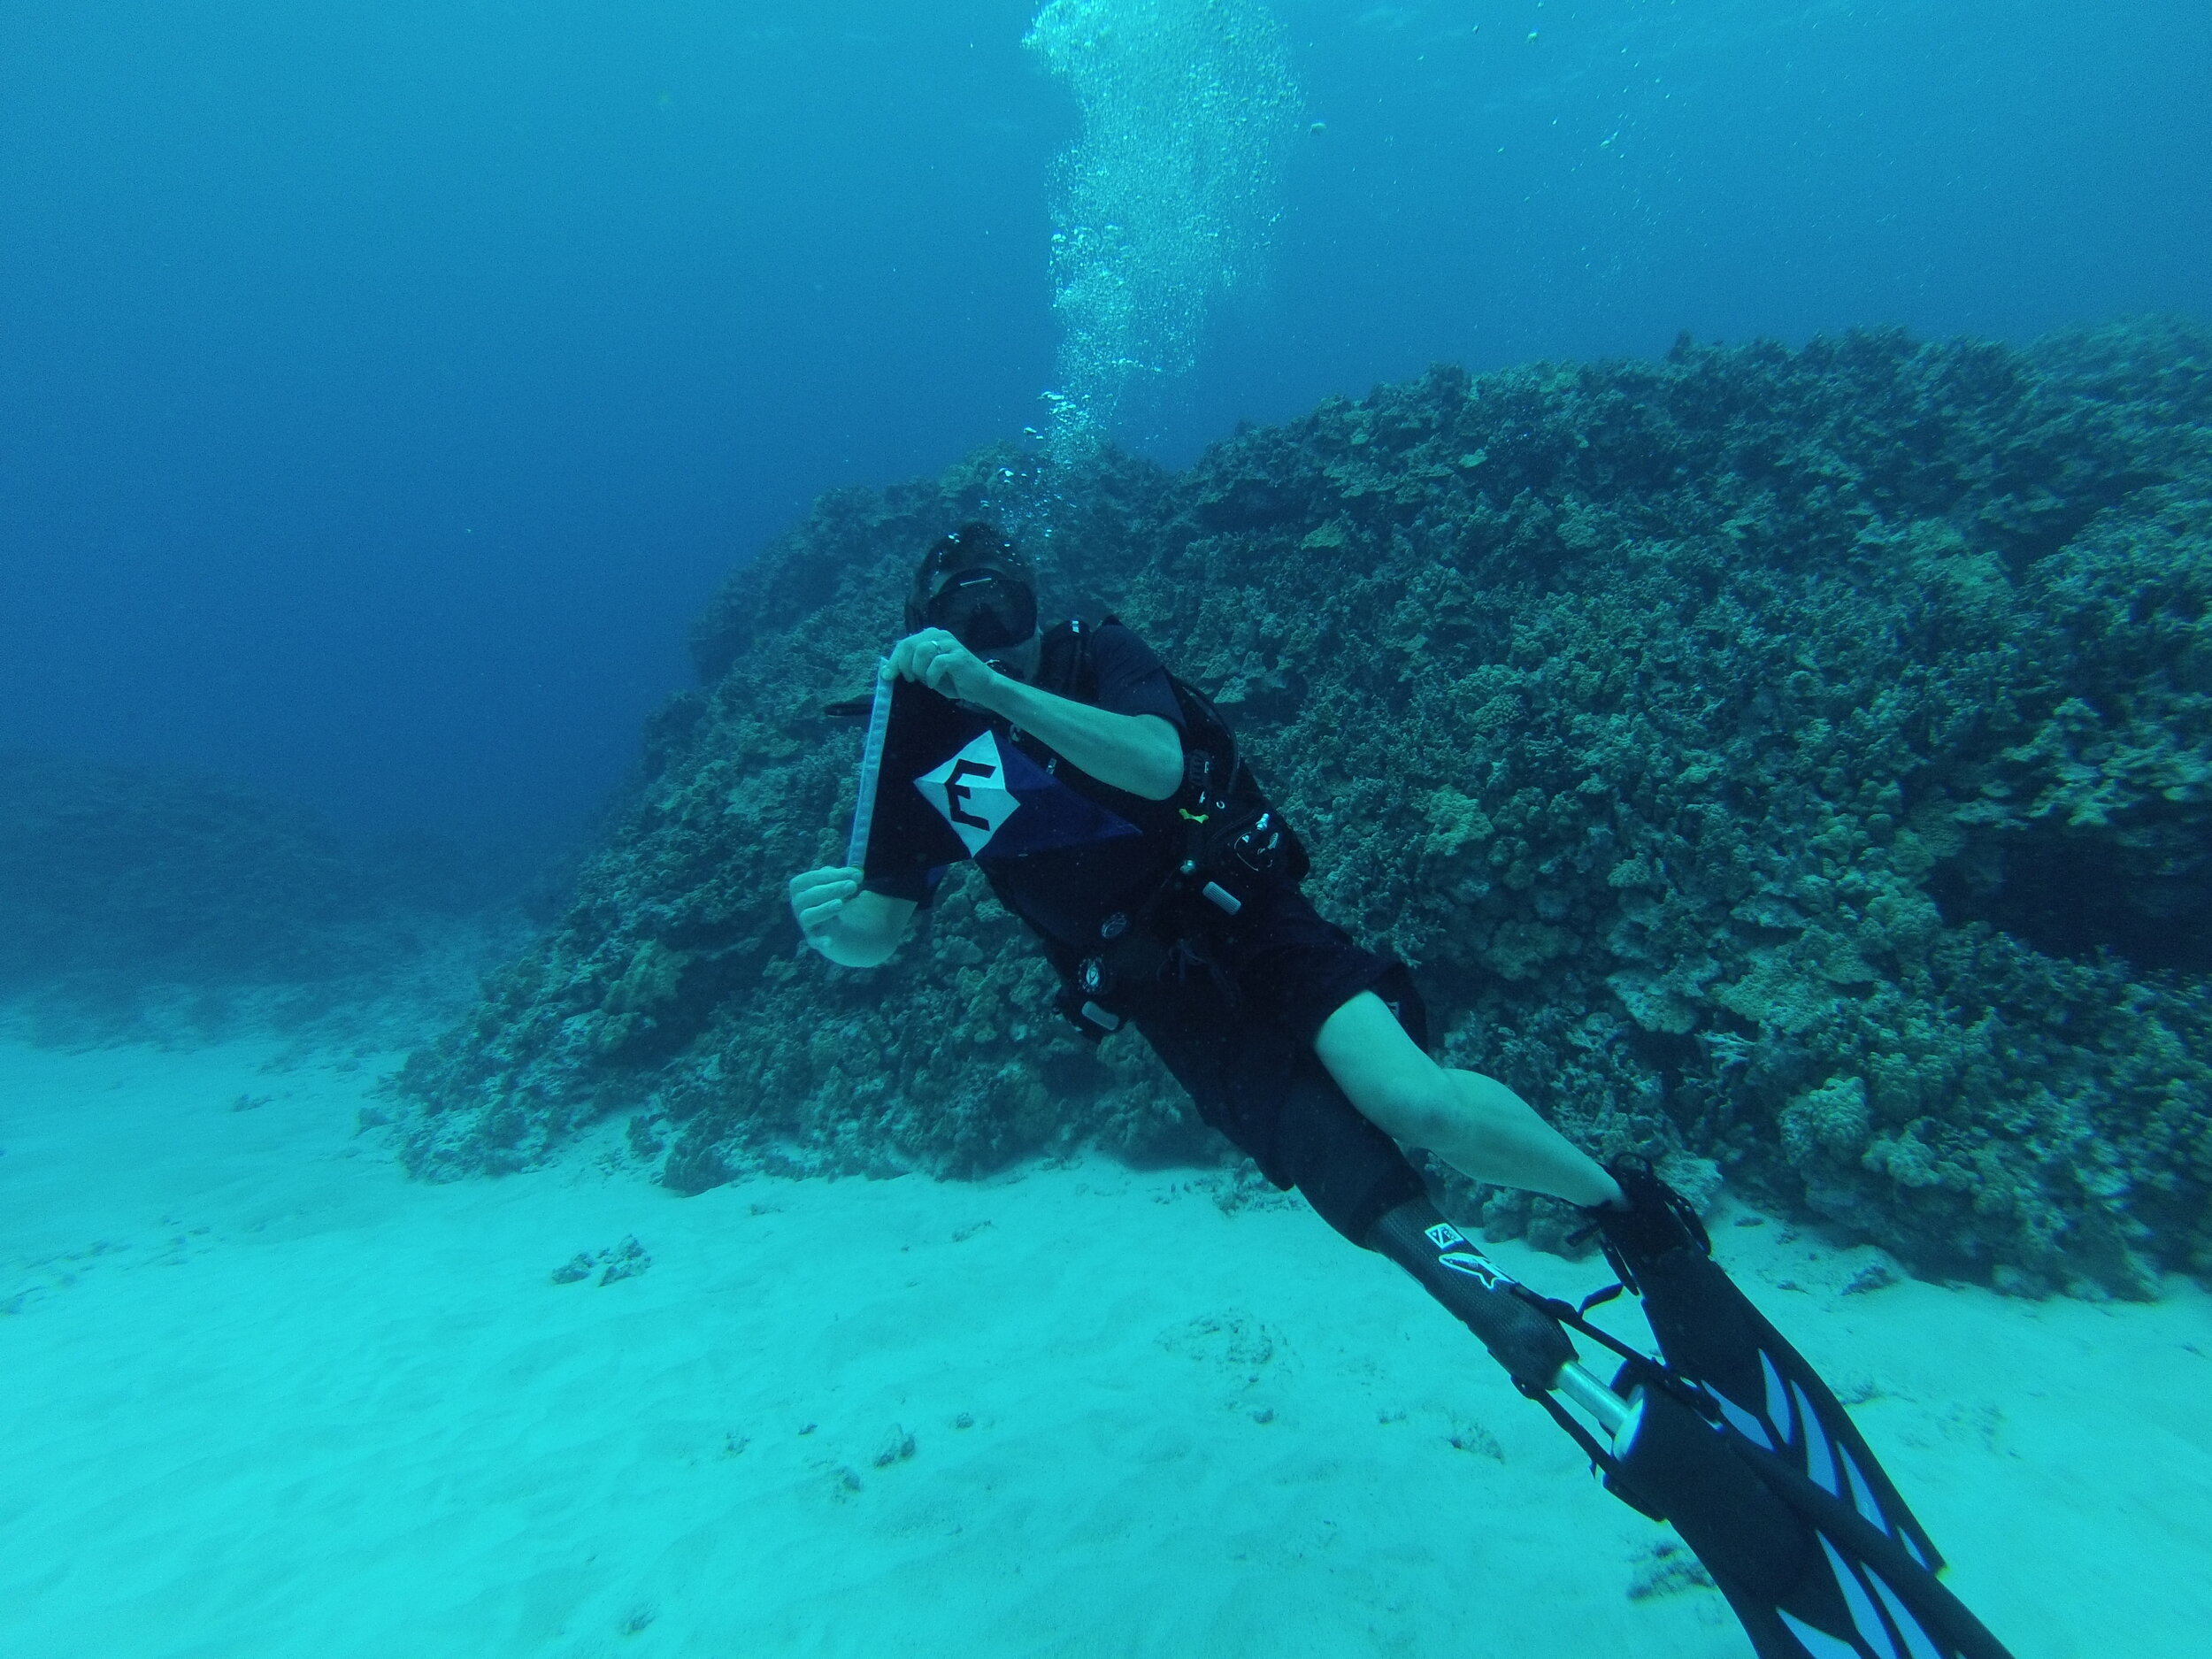  On or under the water off the Big Island of Hawaii, Rob always shows his EYC pride 